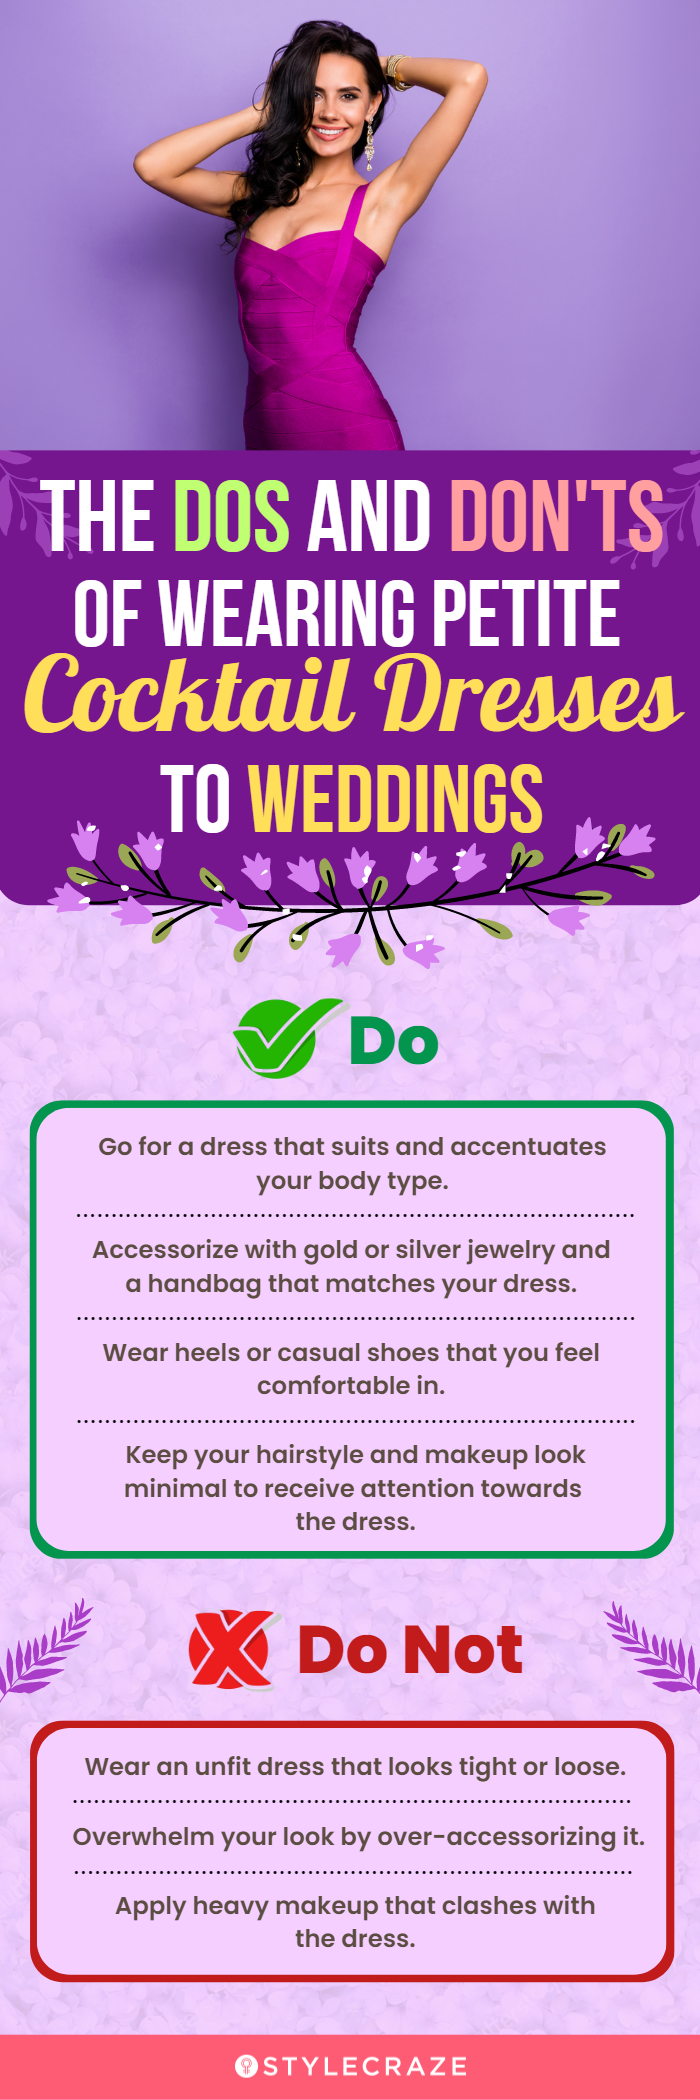 Dos And Don'ts For Wearing Petite Cocktail Dresses To Weddings (infographic)